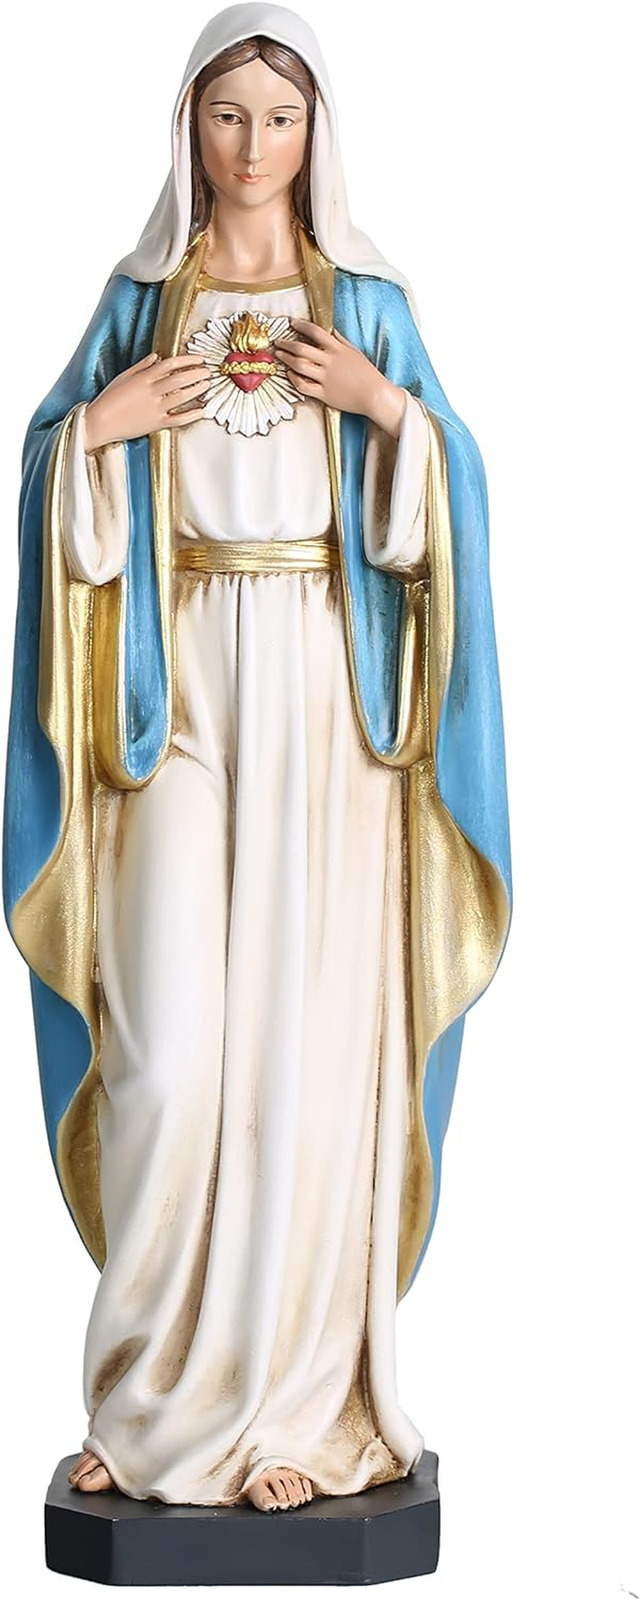 Catholic Immaculate Heart of Mary Statue, 10 Inches H Blessed Virgin Mary Mother